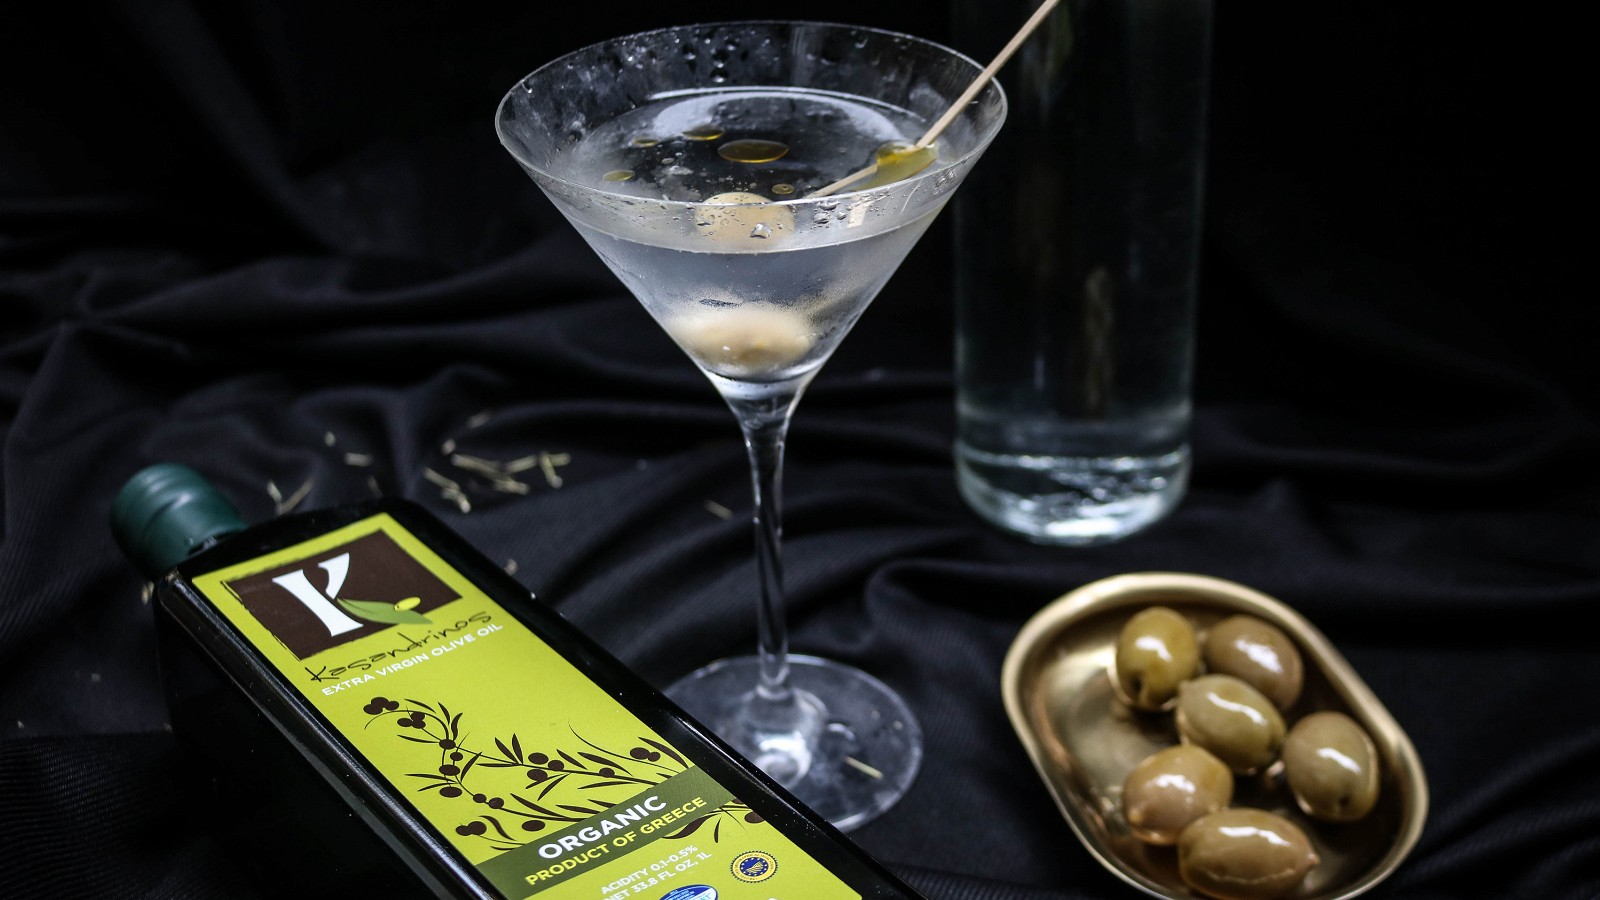 Image of Recipe-54-Rosemary-Infused Extra Virgin Olive Oil Martini